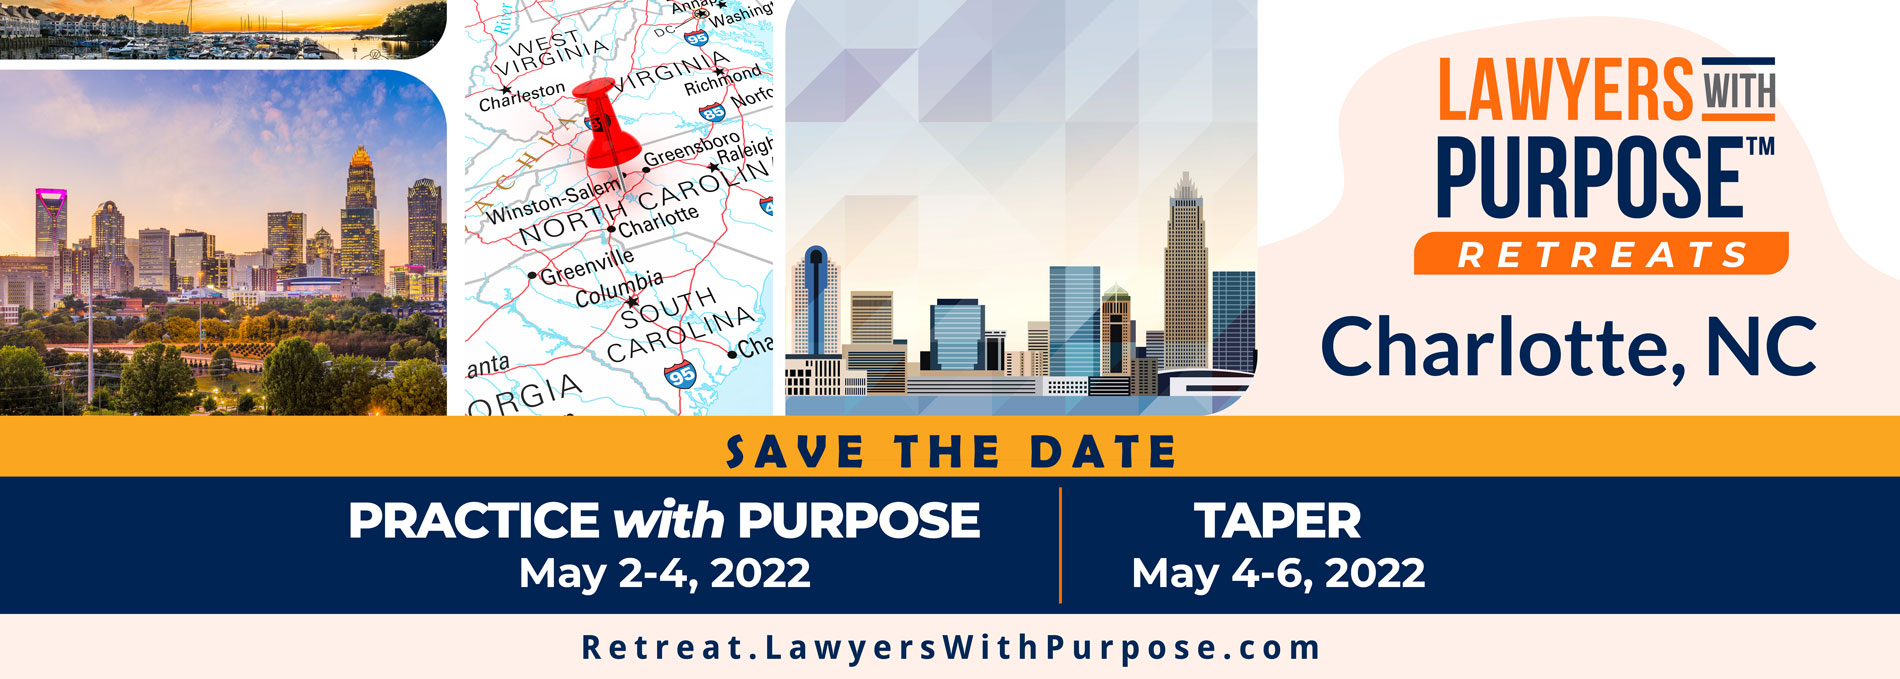 Save the date: Practice with Purpose - May 2-4, 2022 and TAPER - May 4-6, 2022